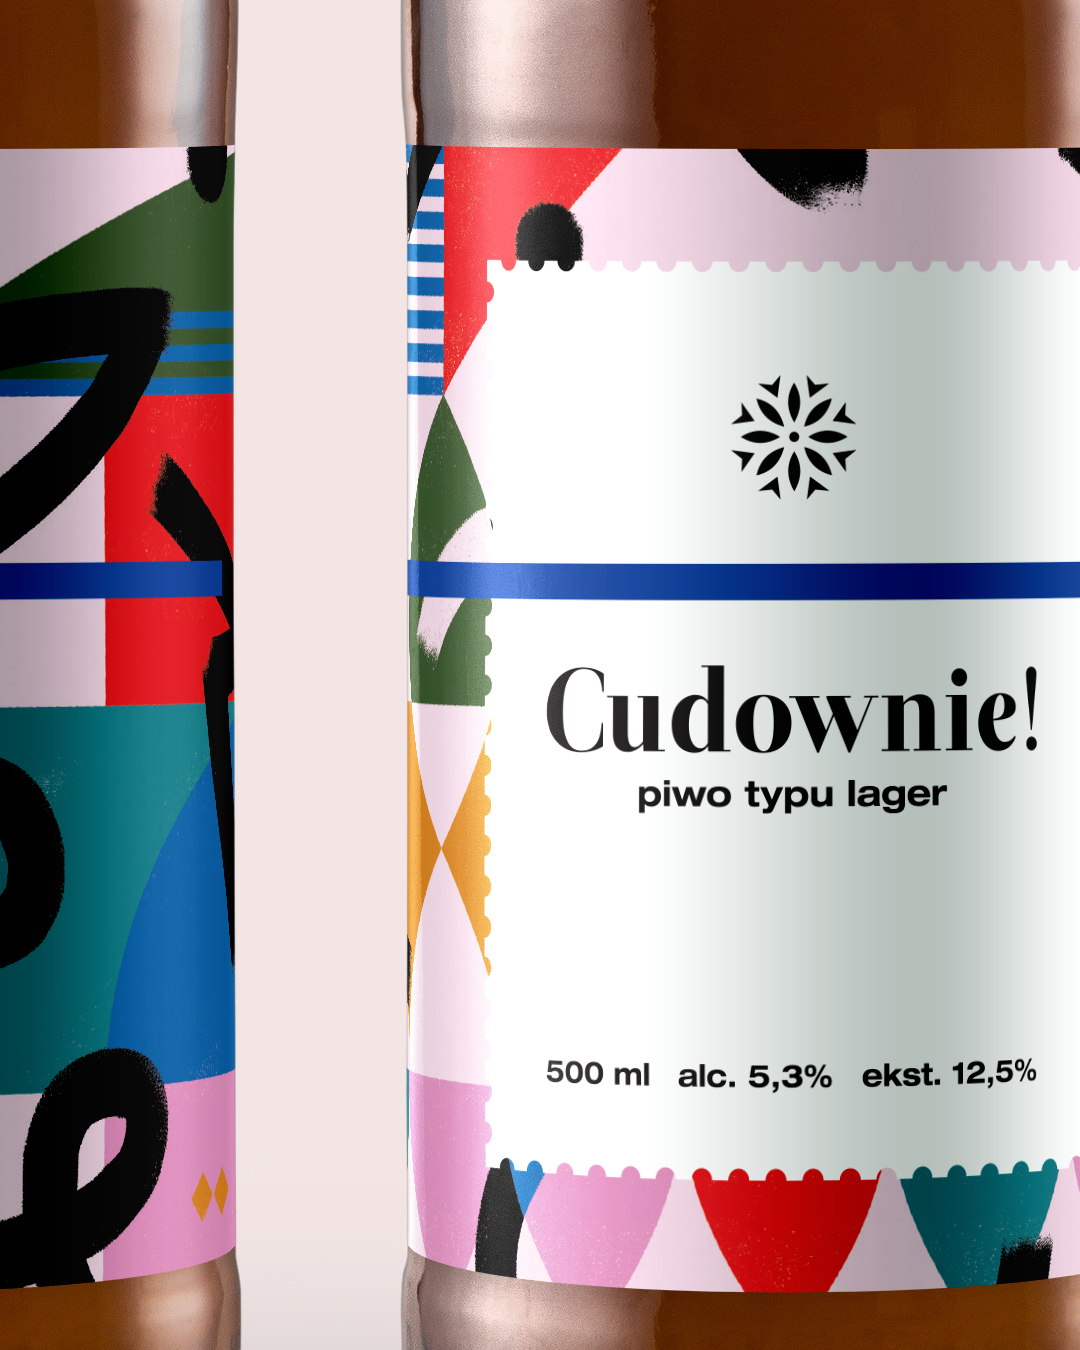 Different Approach to Polish Beer Label Graphic Design